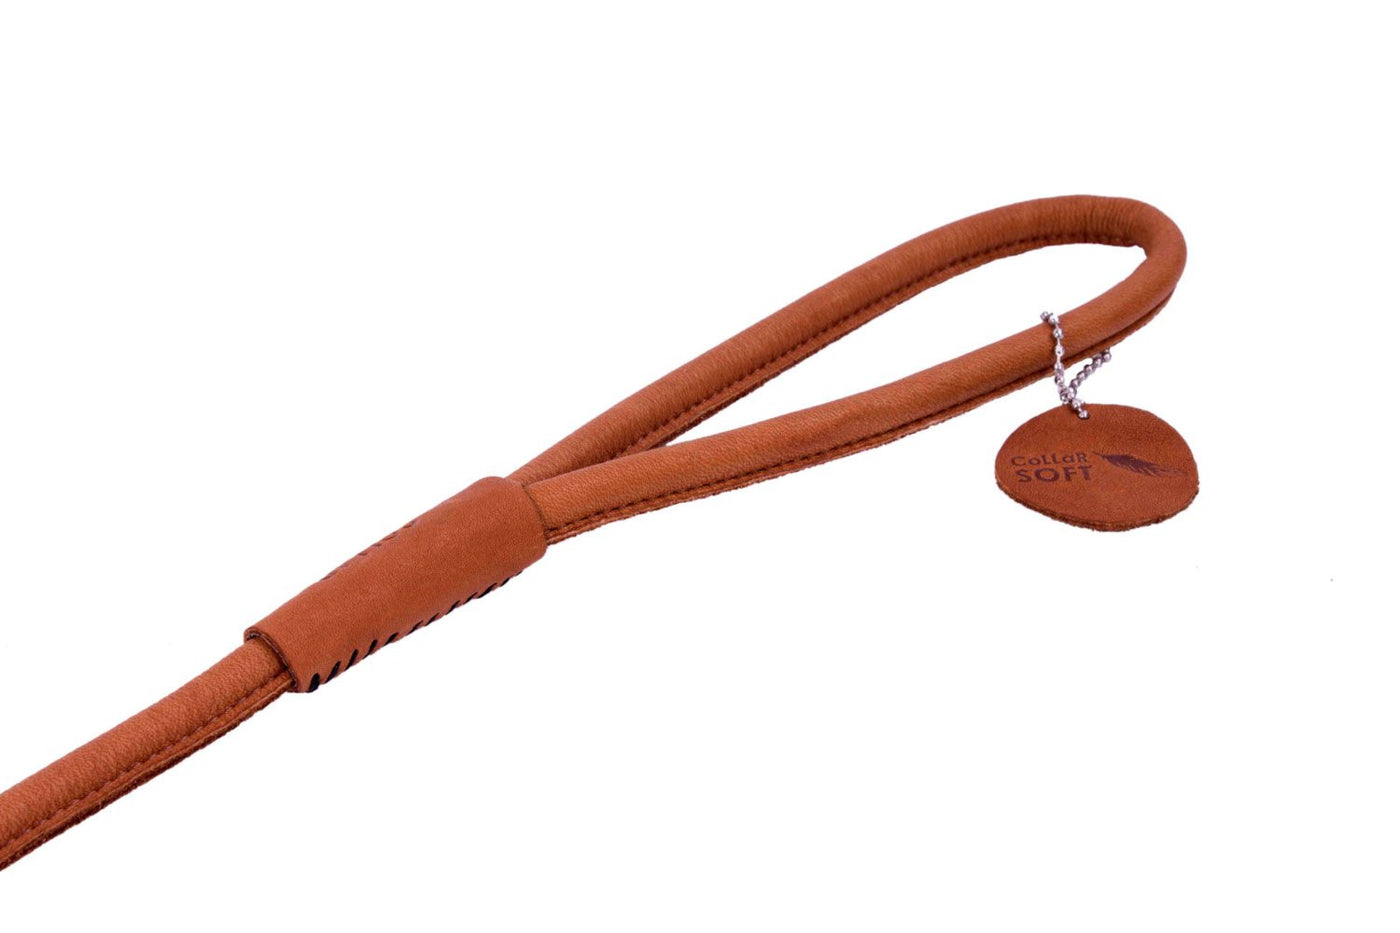 Round-stitched leather dog leash - COLLAR SOFT - black or brown - 183 cm